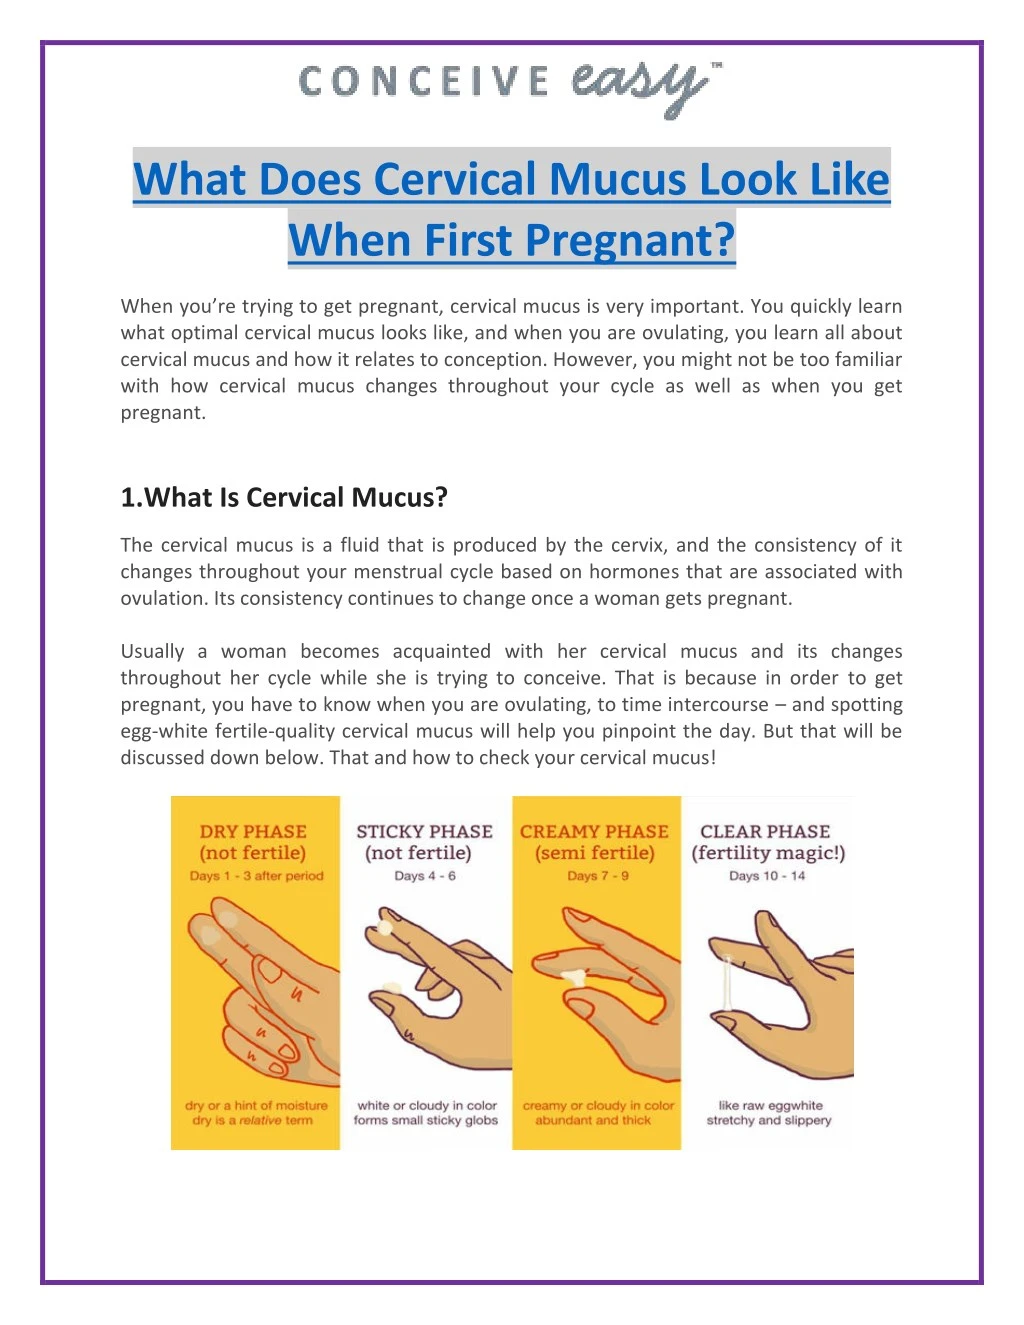 what does cervical mucus look like when first